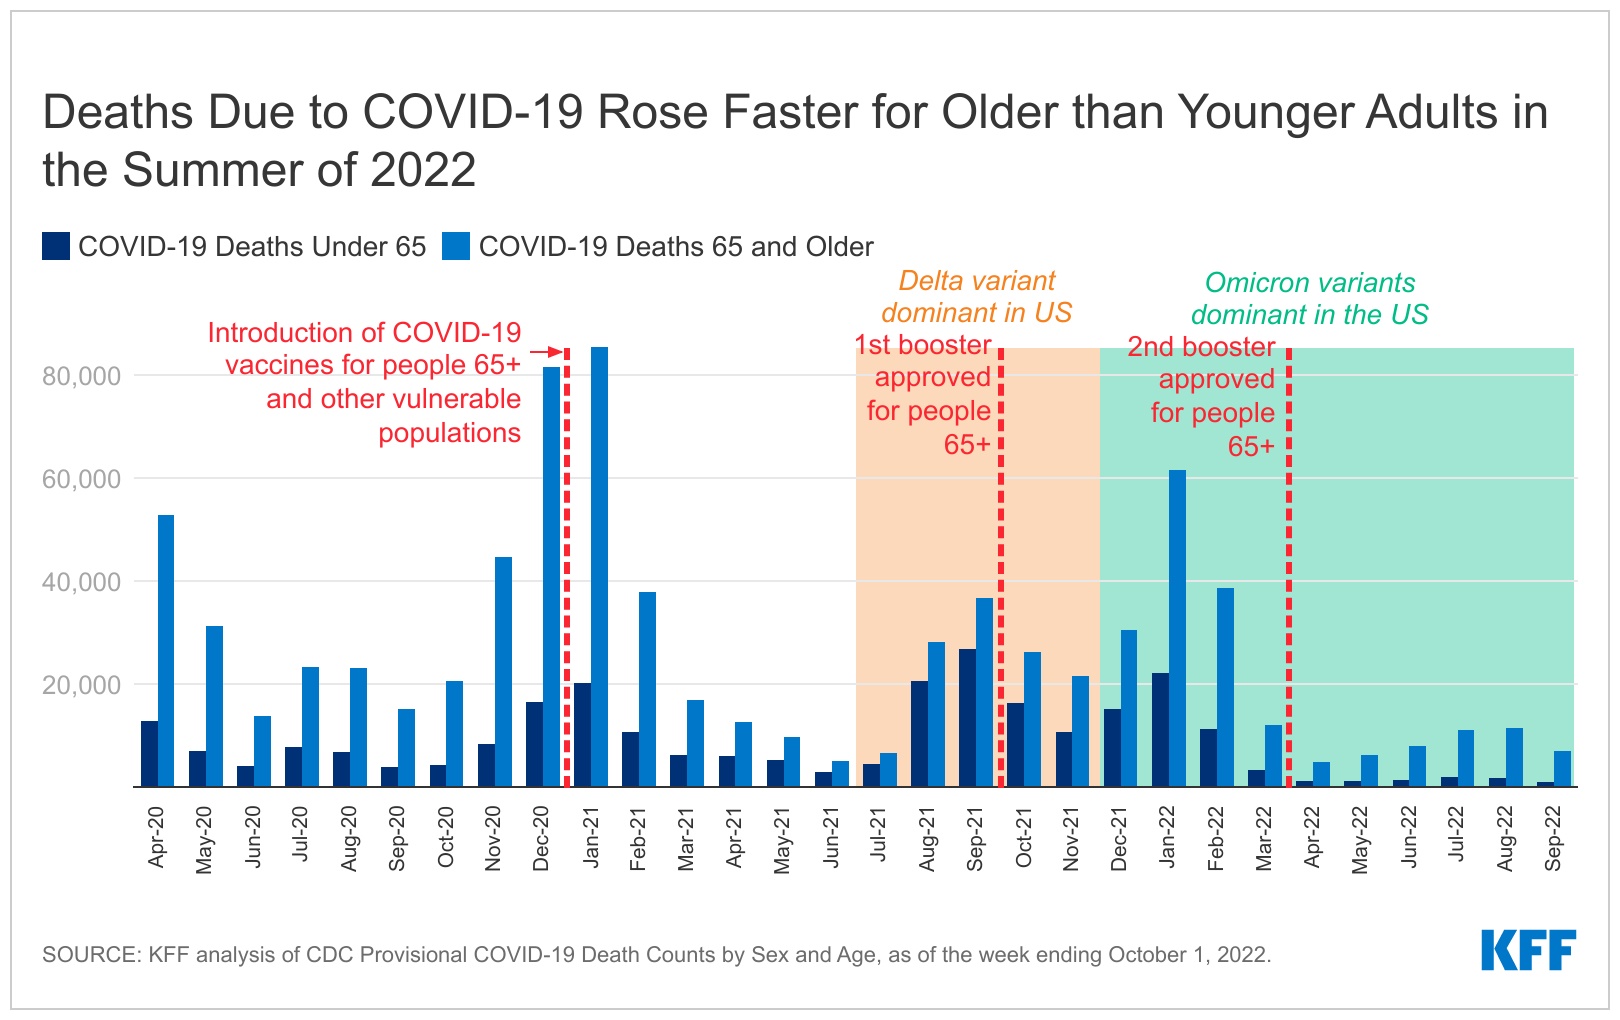 Deaths-due-to-covid-19-rose-faster-for-older-than-younger-adults-in-the-summer-of-2022-nbsp_IMAGE.jpg